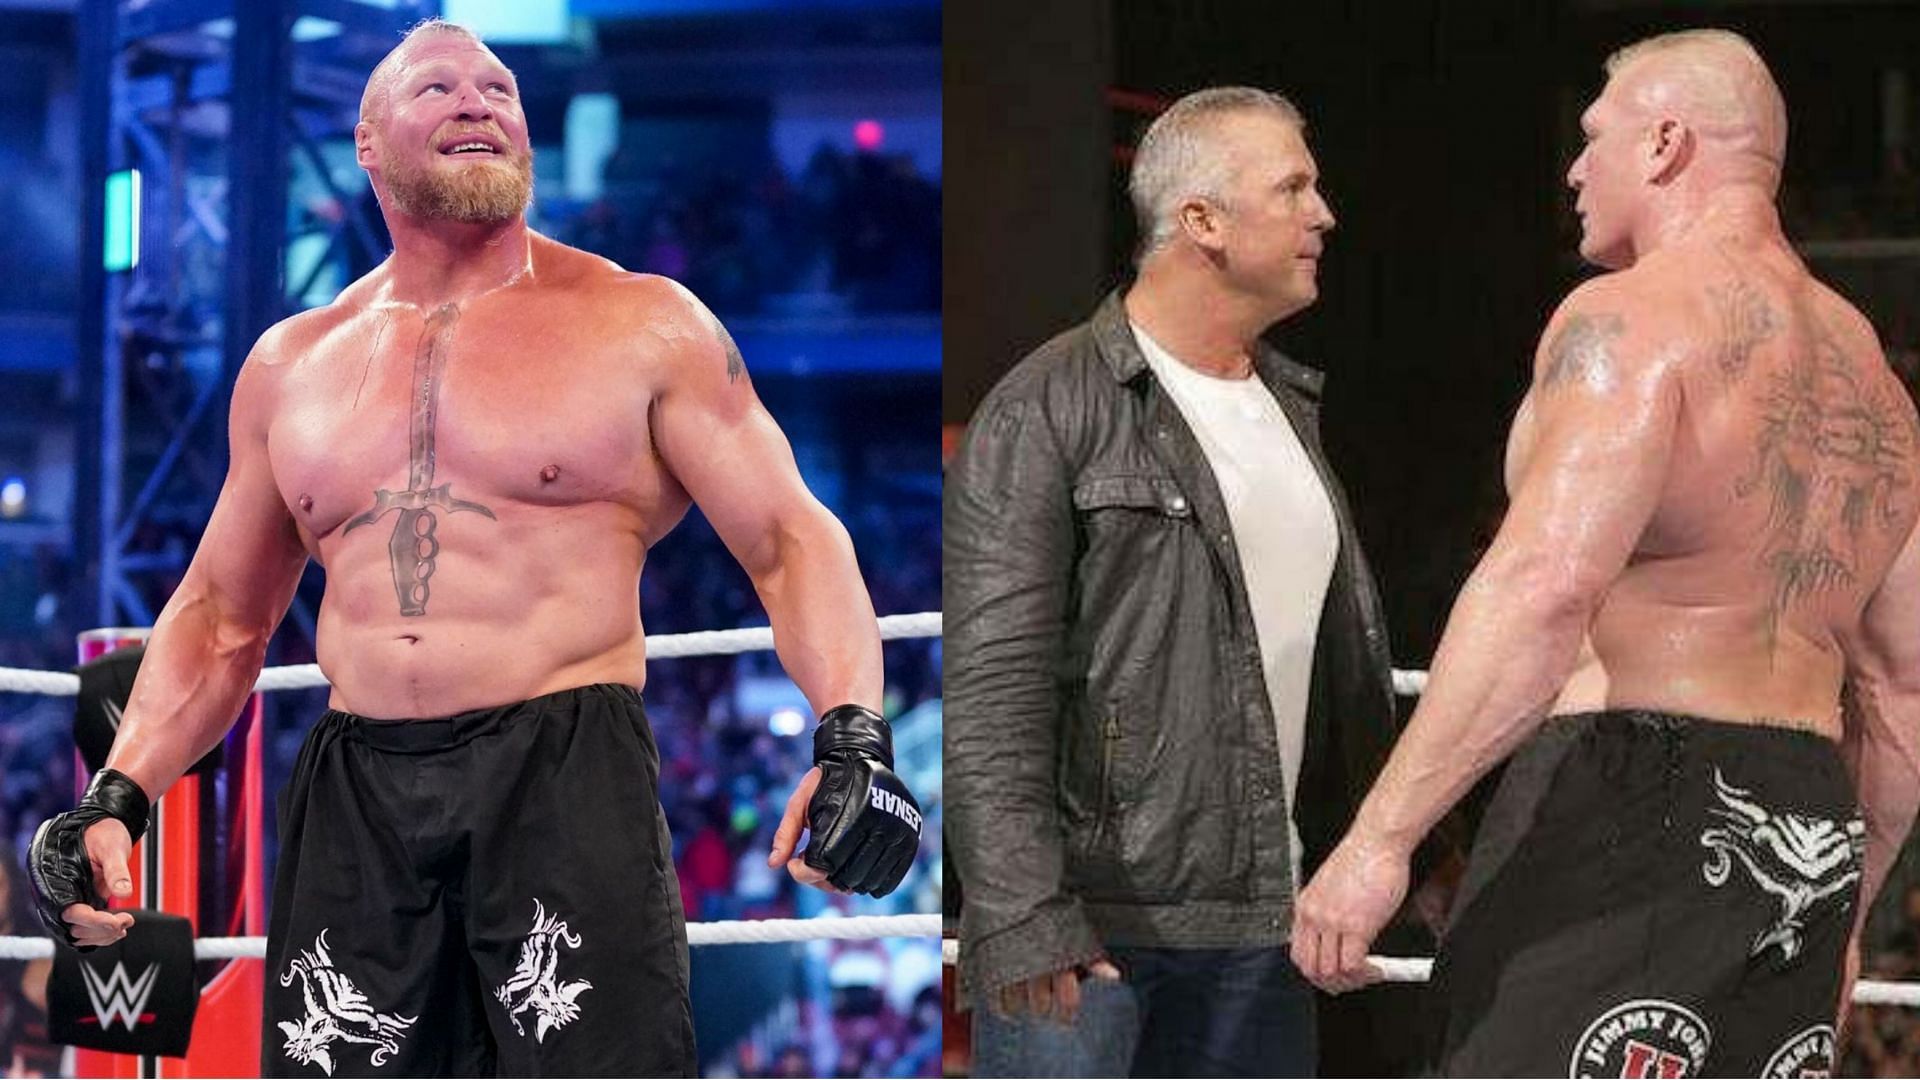 Lesnar could regain the WWE Championship.